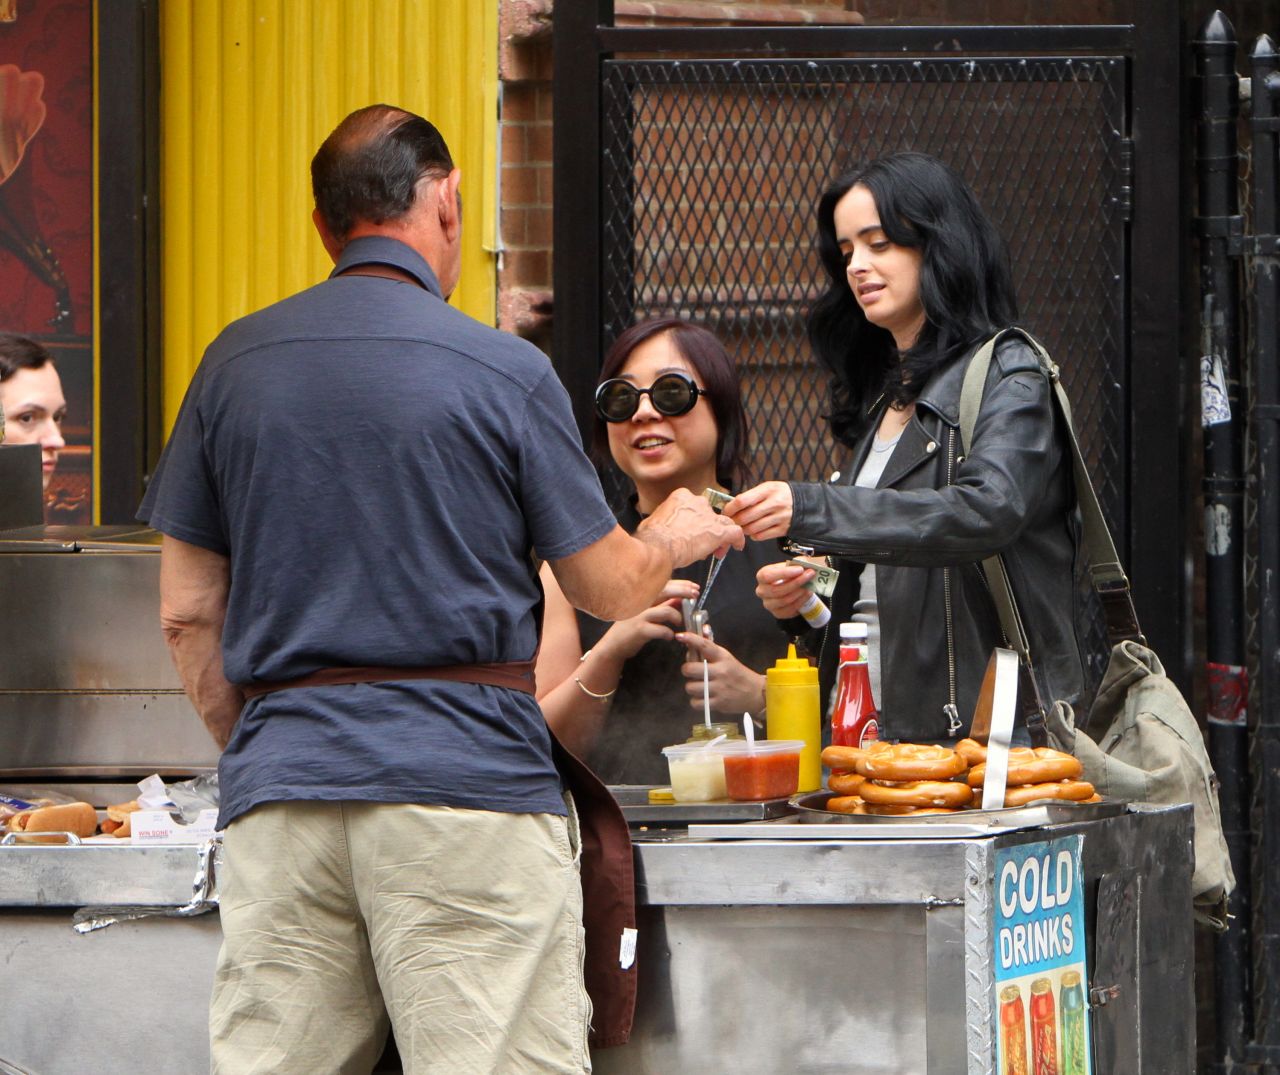 Krysten Ritter and Rachael Taylor at the "Jessica Jones" Set in M...